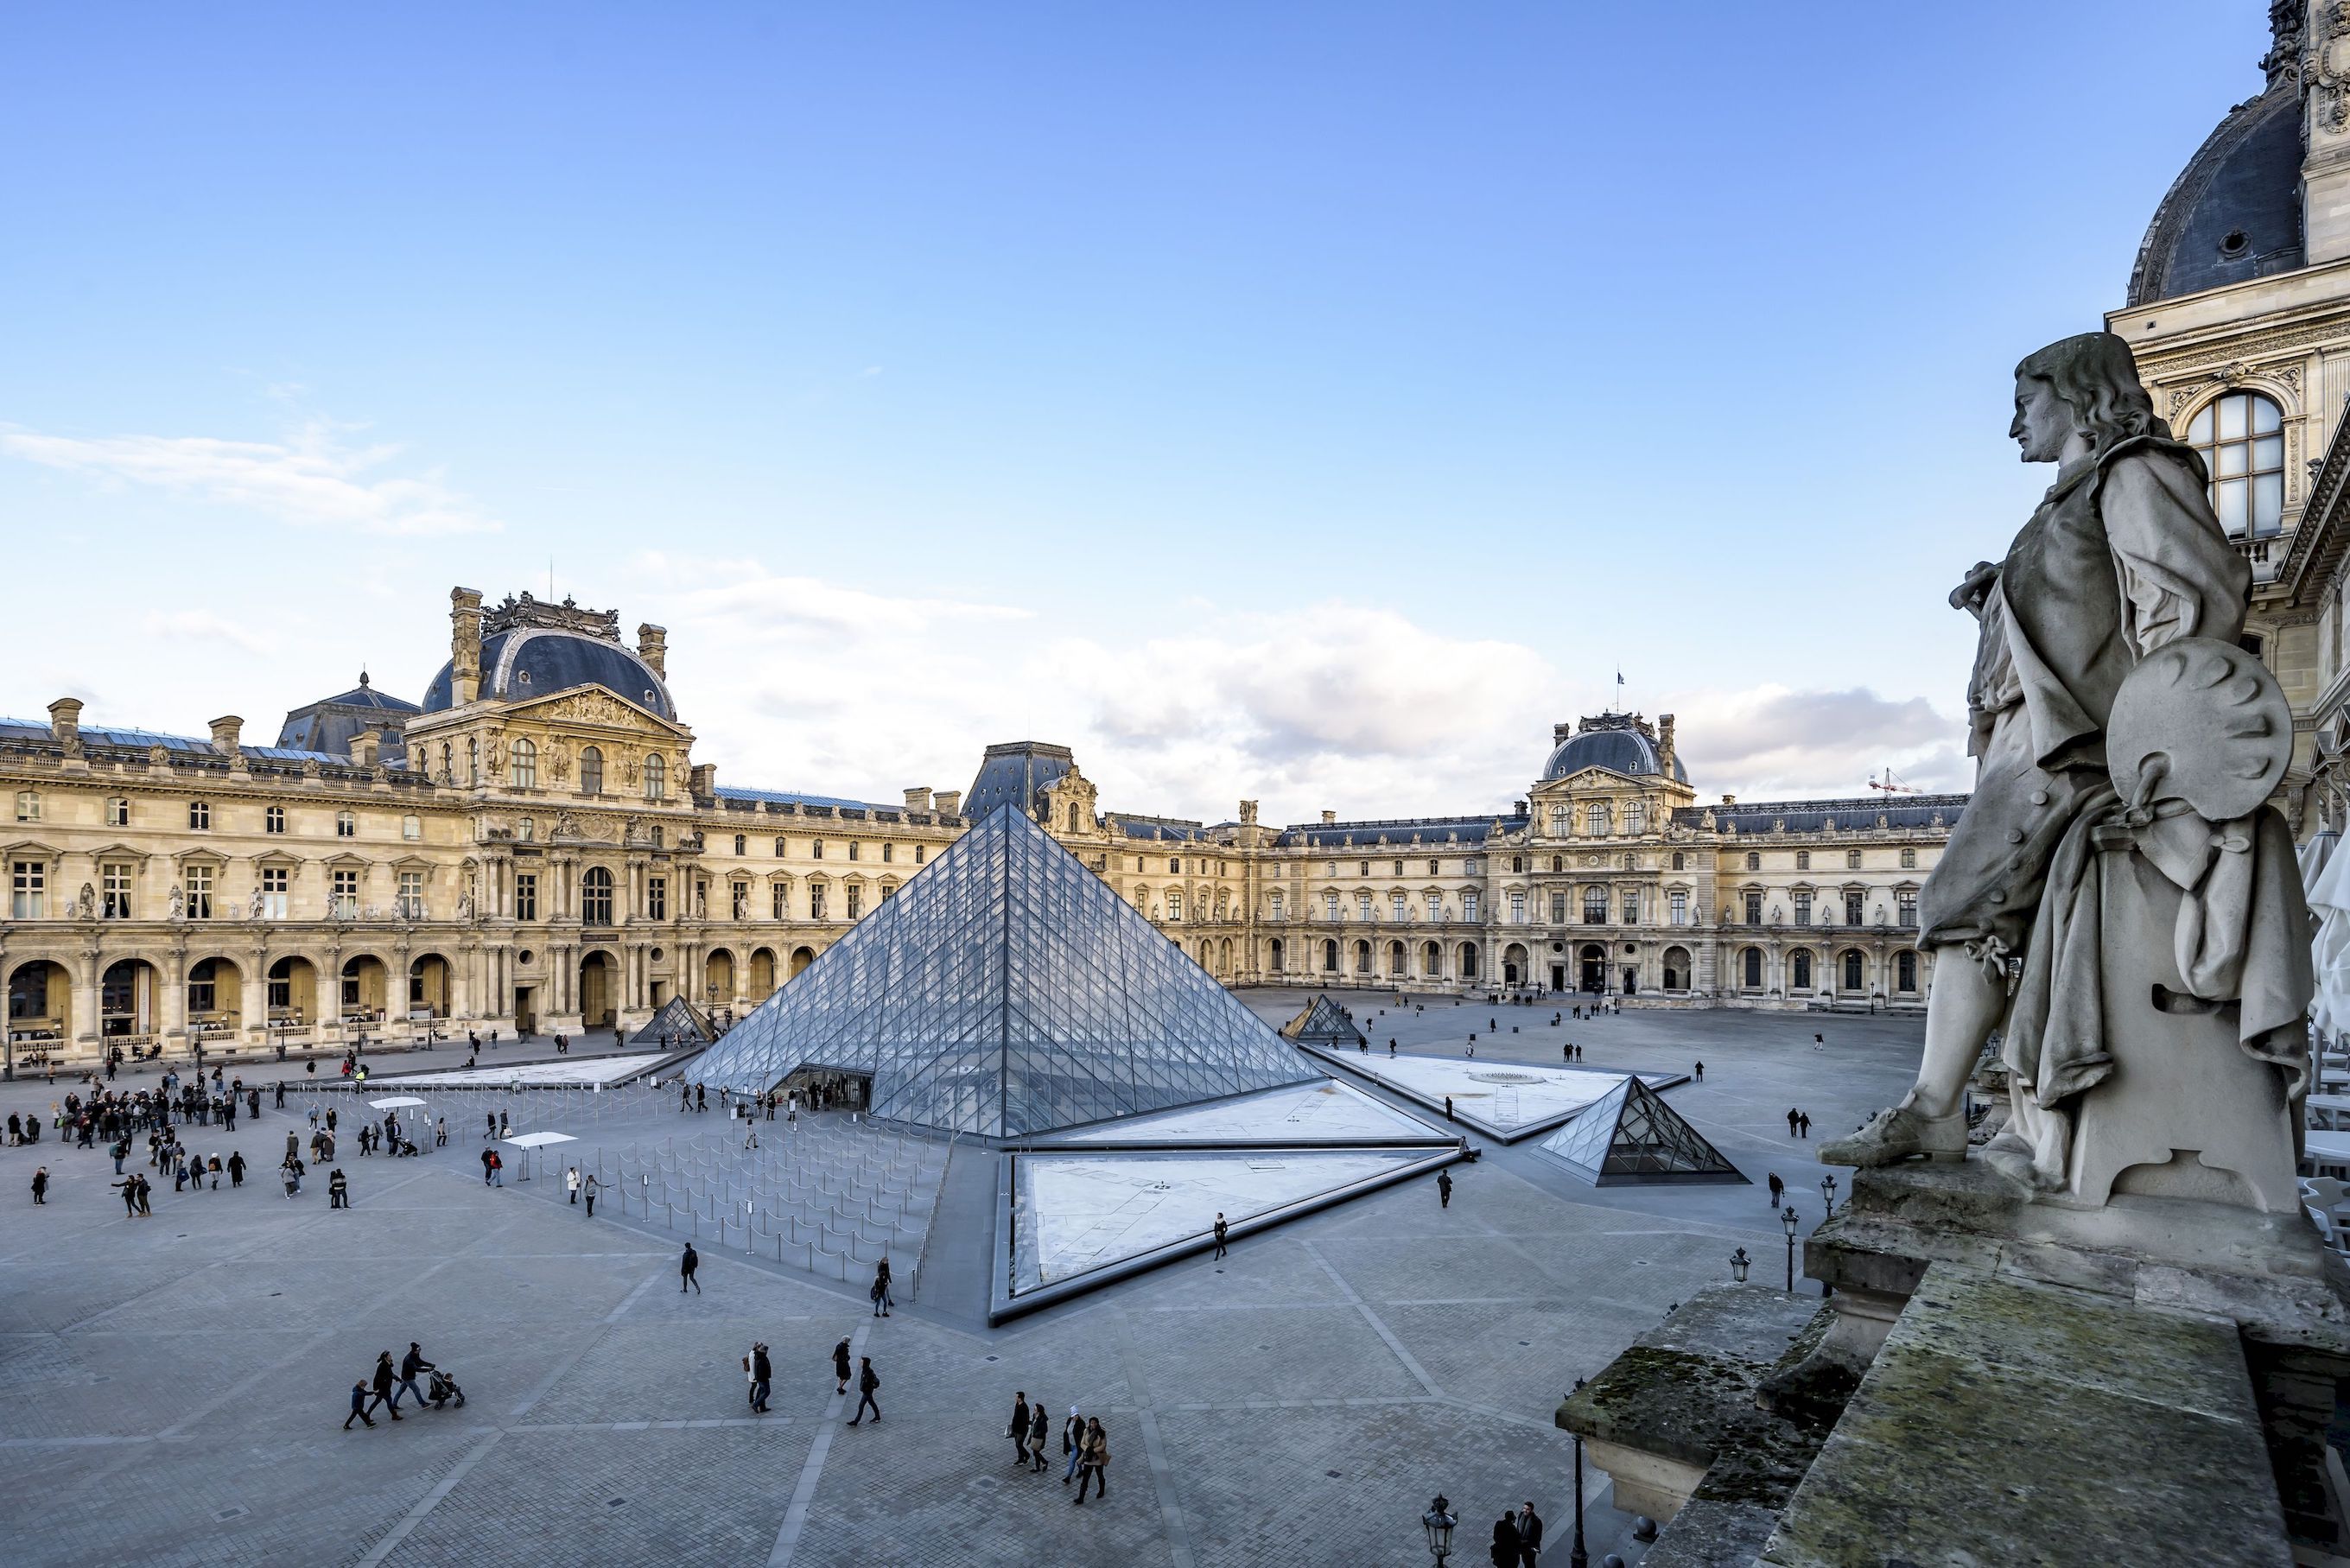 Vacheron Constantin teams up with the Louvre